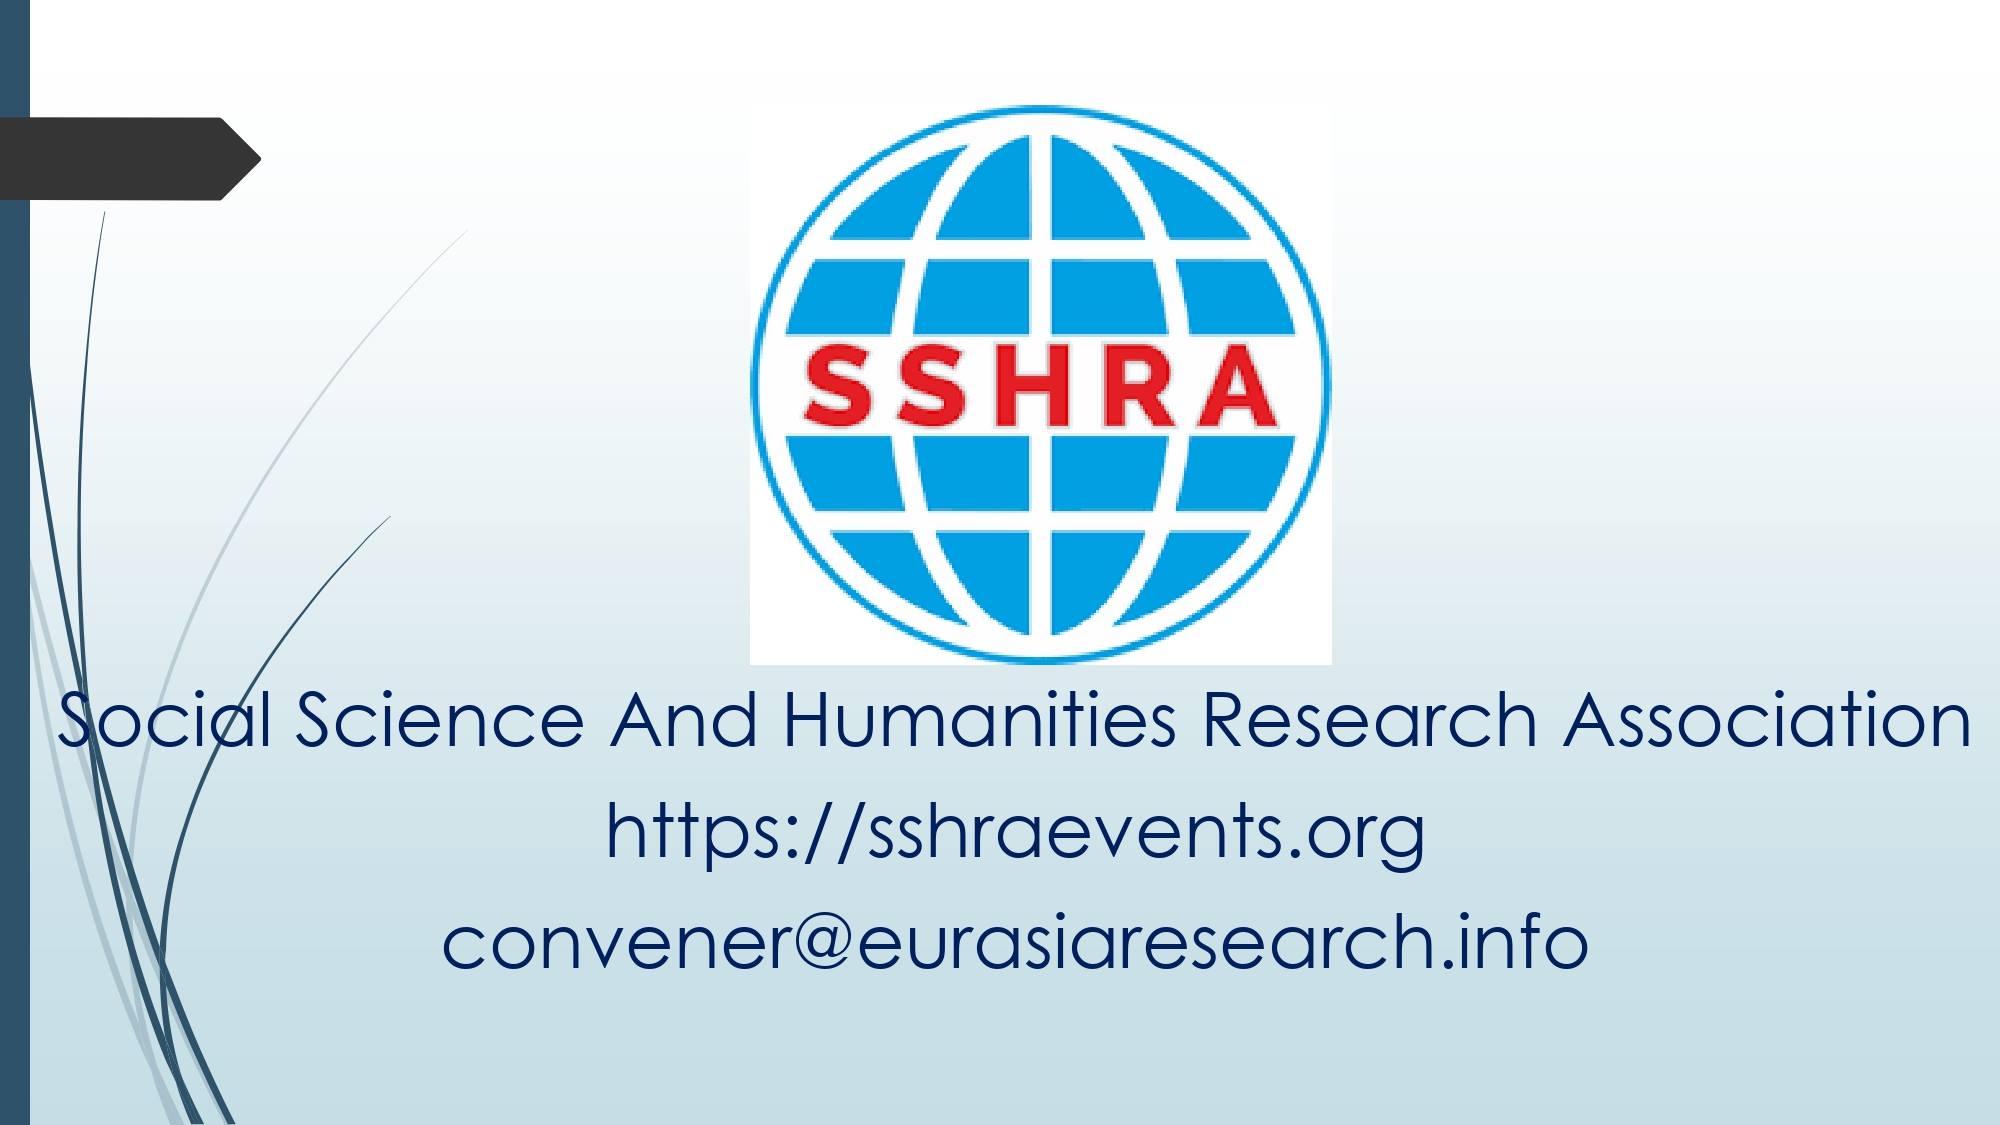 Barcelona – International Conference on Social Science & Humanities (ICSSH), 25-26 May 2021, Barcelona, Spain